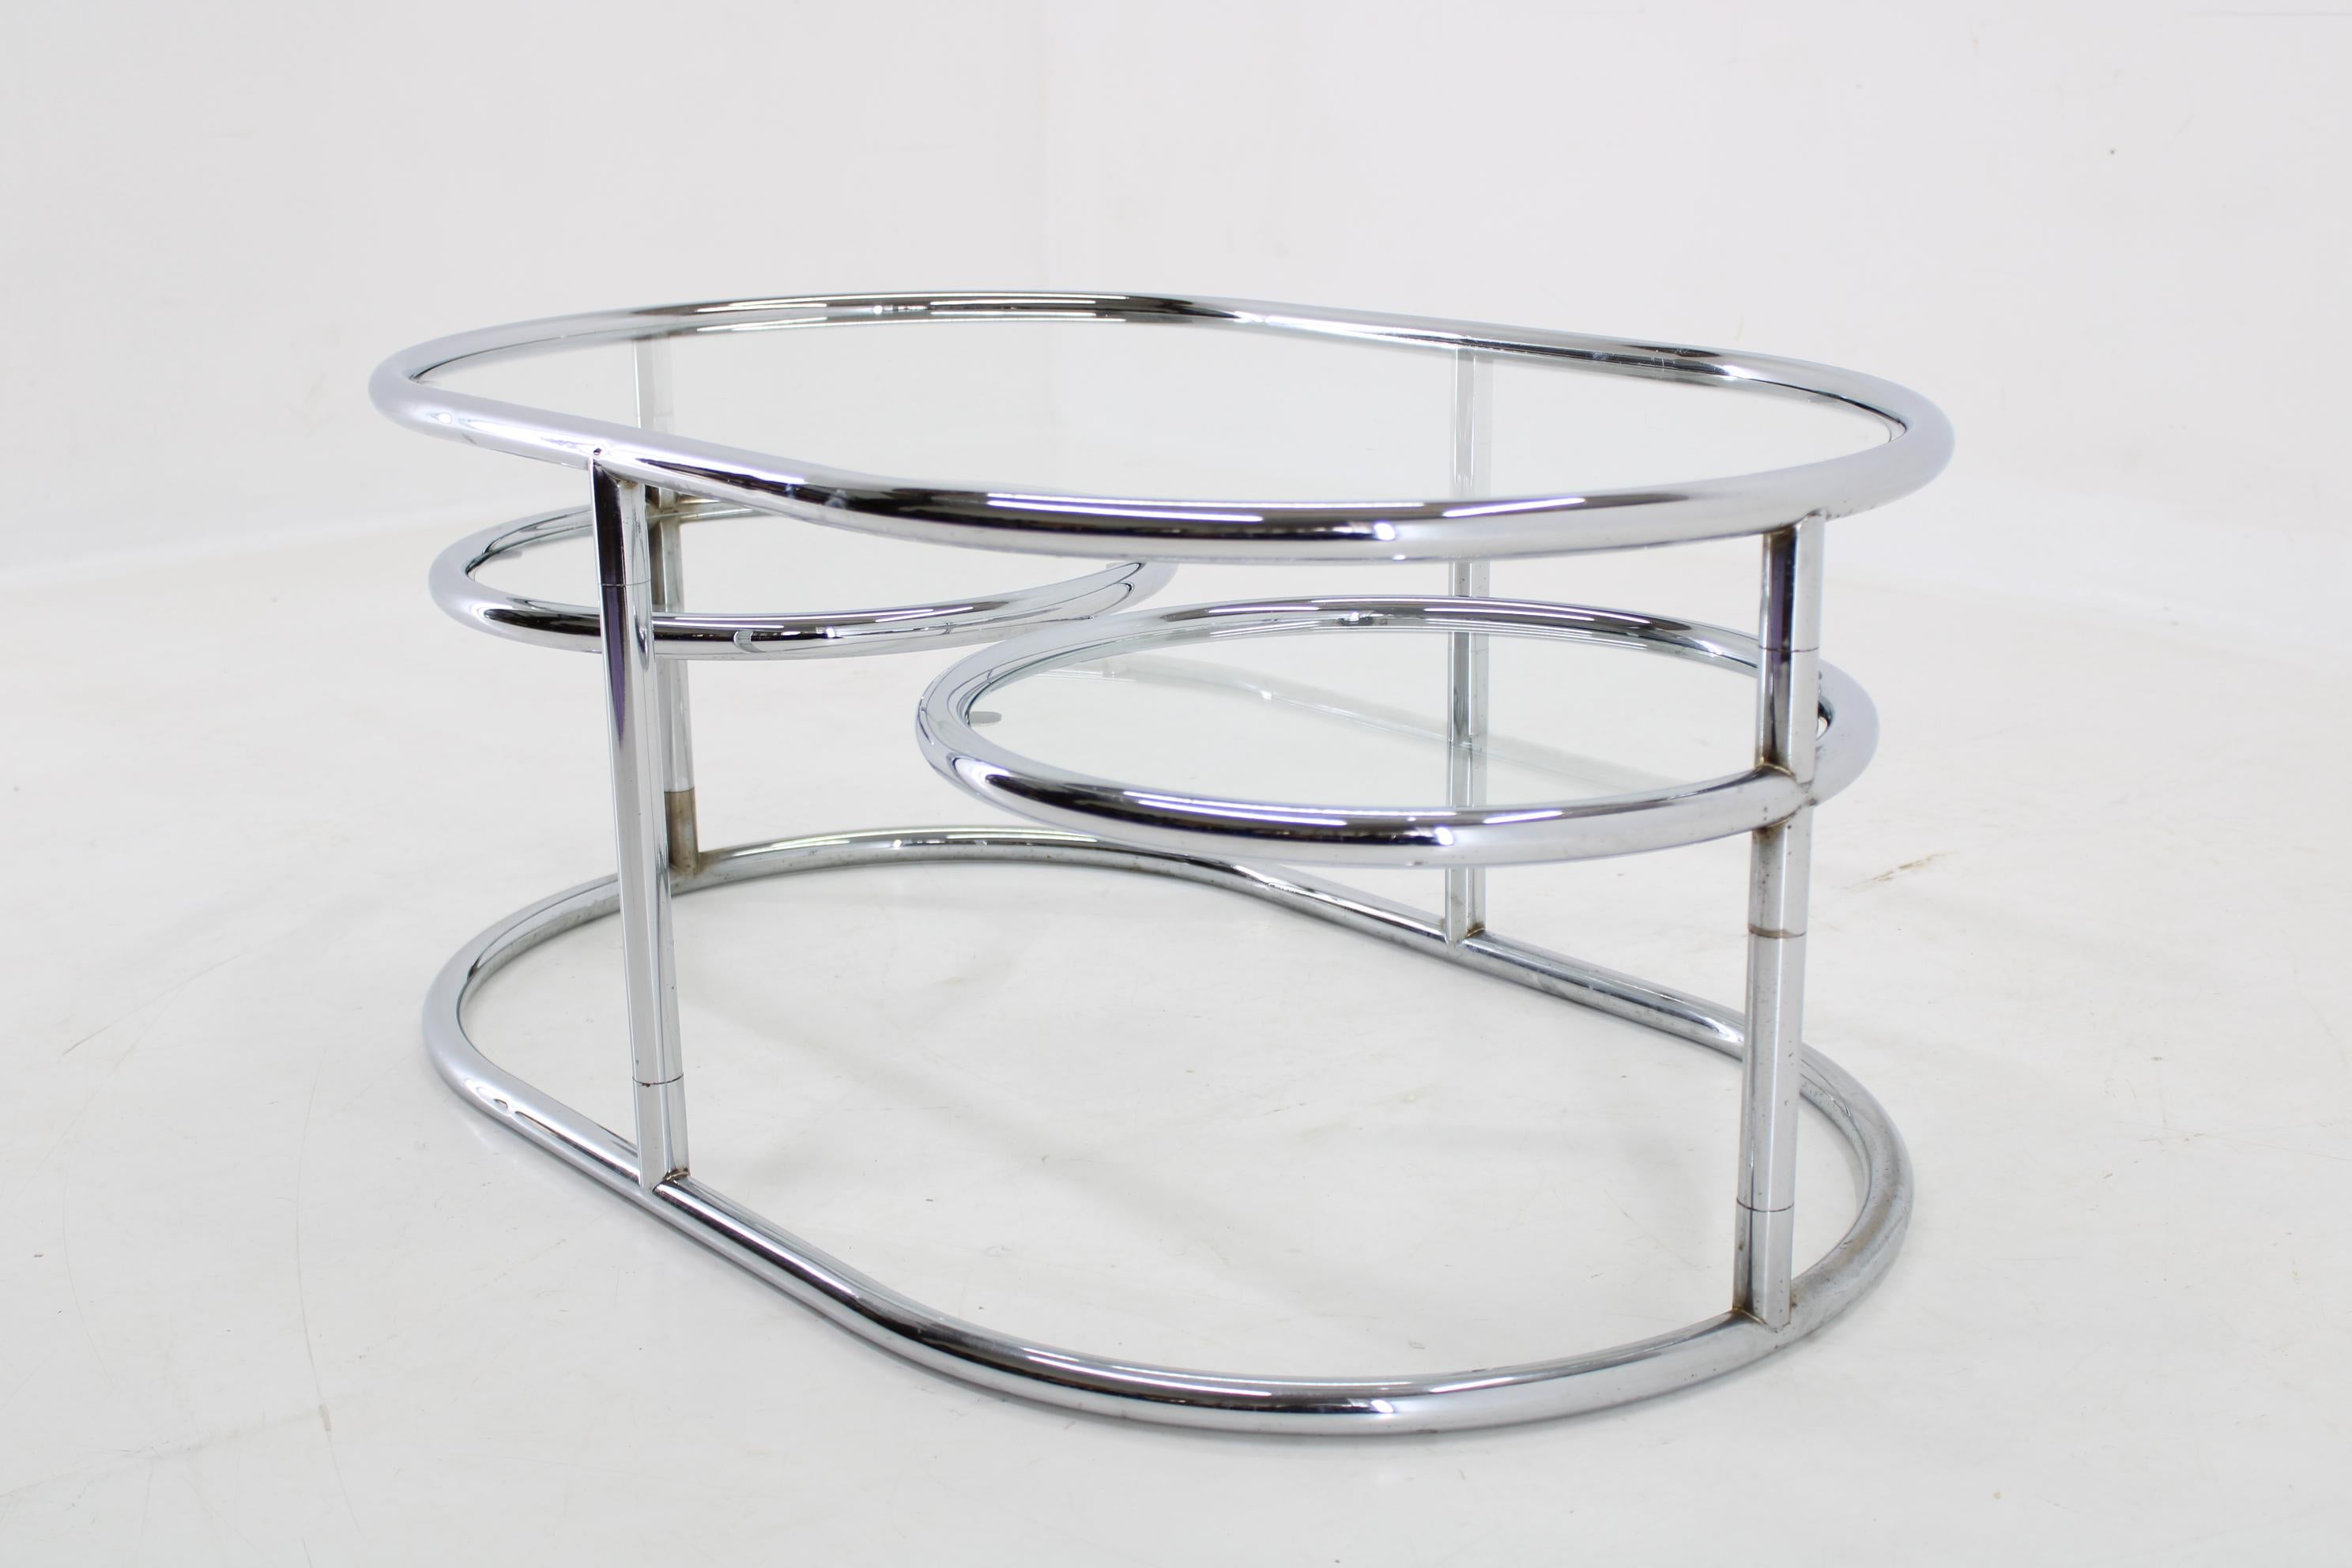 1980s Chrome Plated Tubular Coffee Table with Glass Top, Germany 1